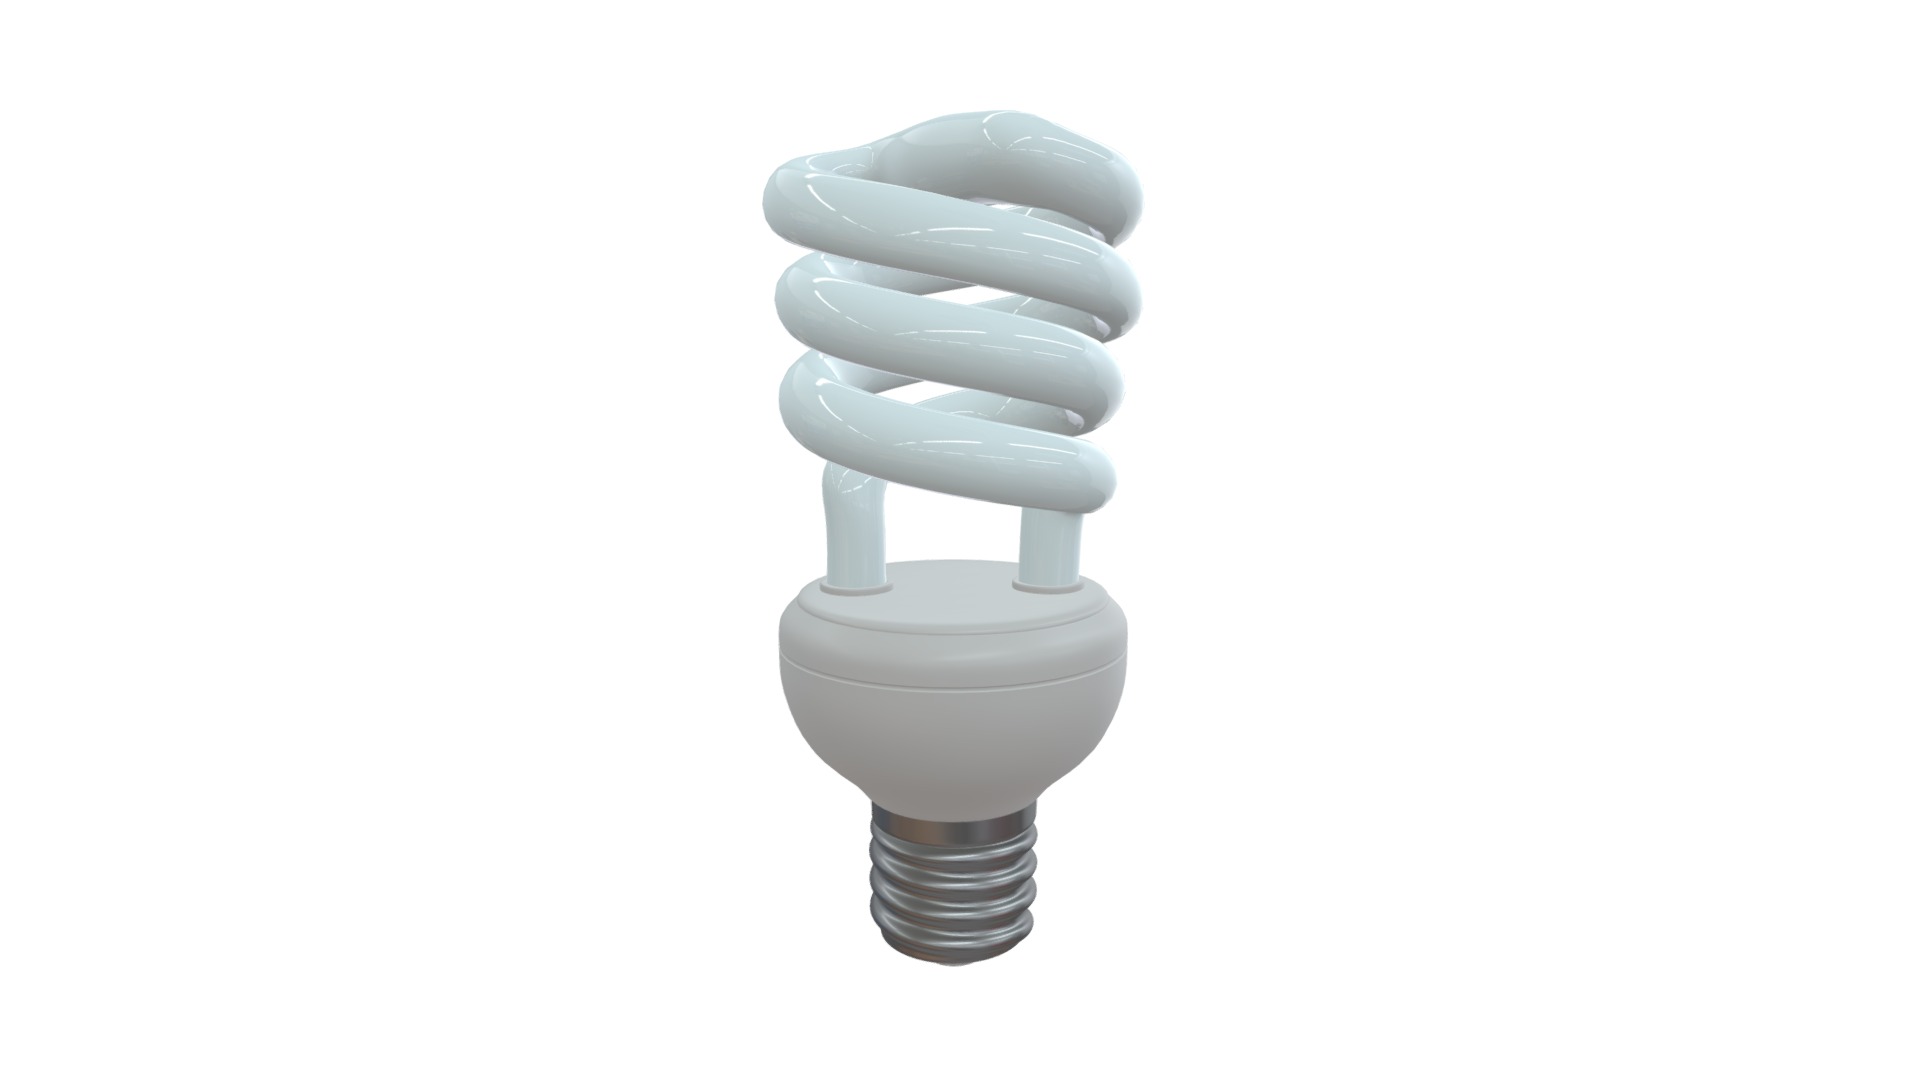 3D model Compact fluorescent light bulb 1 - This is a 3D model of the Compact fluorescent light bulb 1. The 3D model is about a stack of white cylindrical objects.